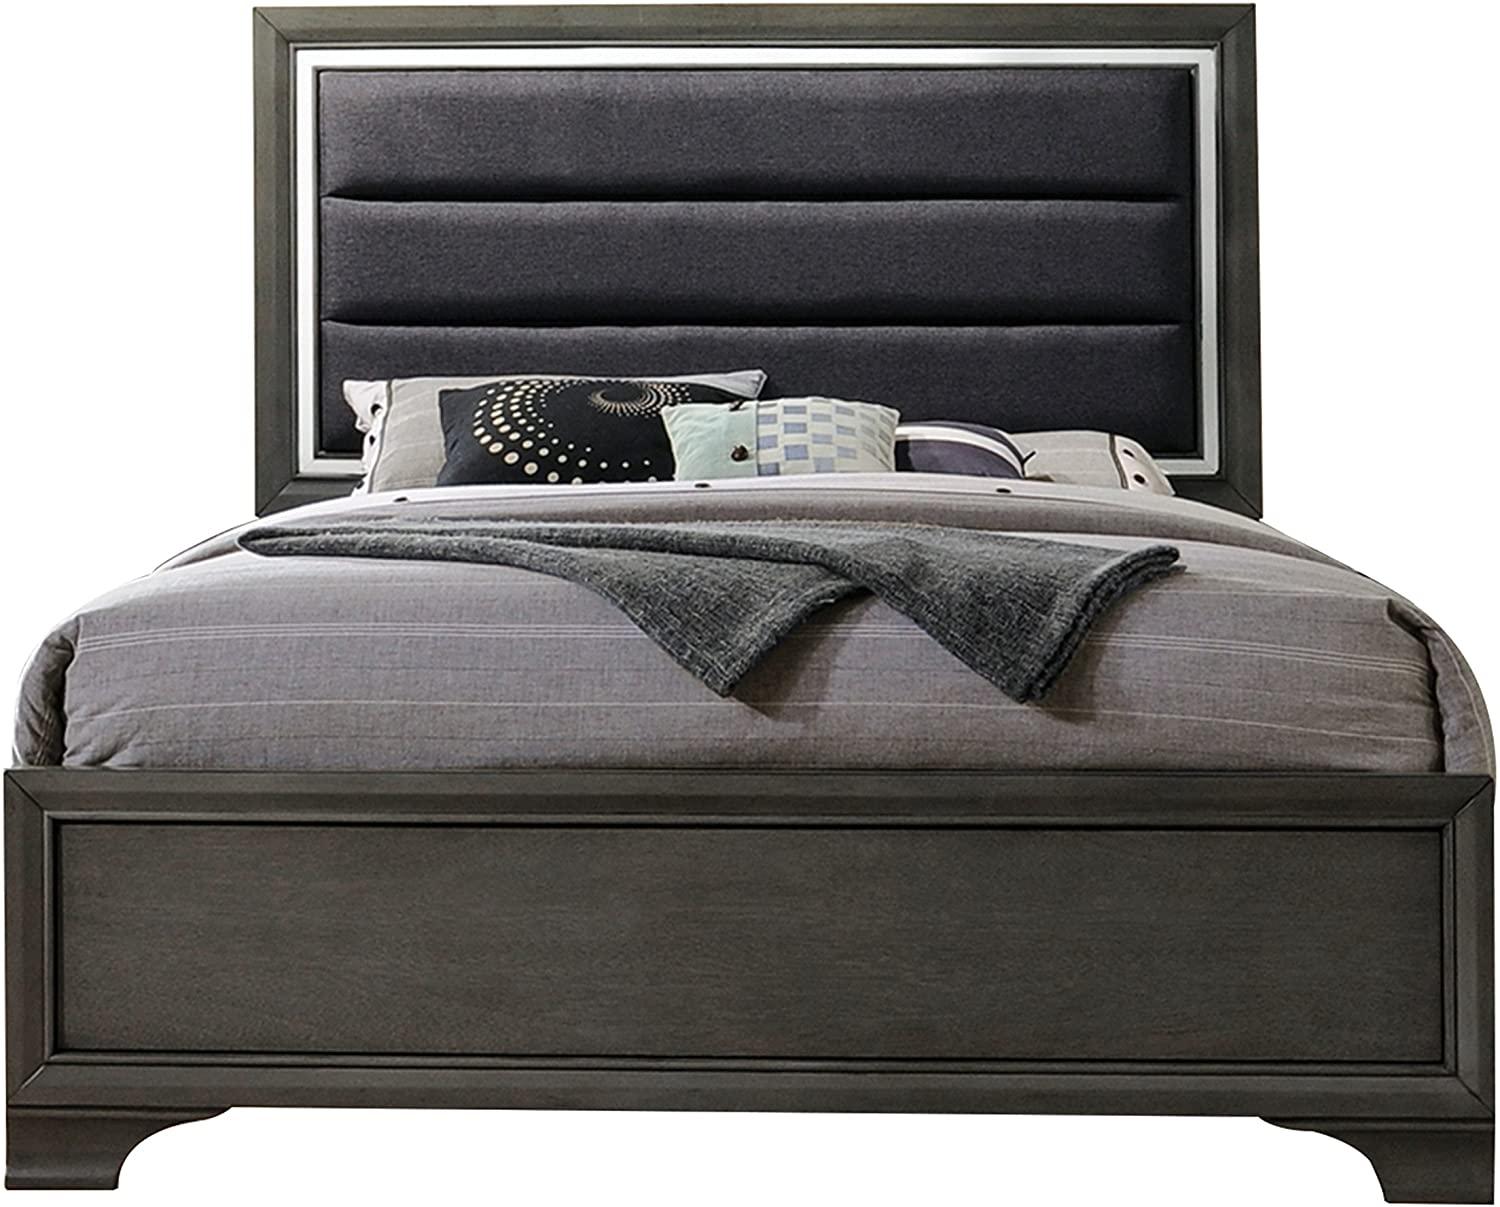 Transitional Panel Bed Carine II-26260Q 26260Q in Charcoal, Gray Fabric